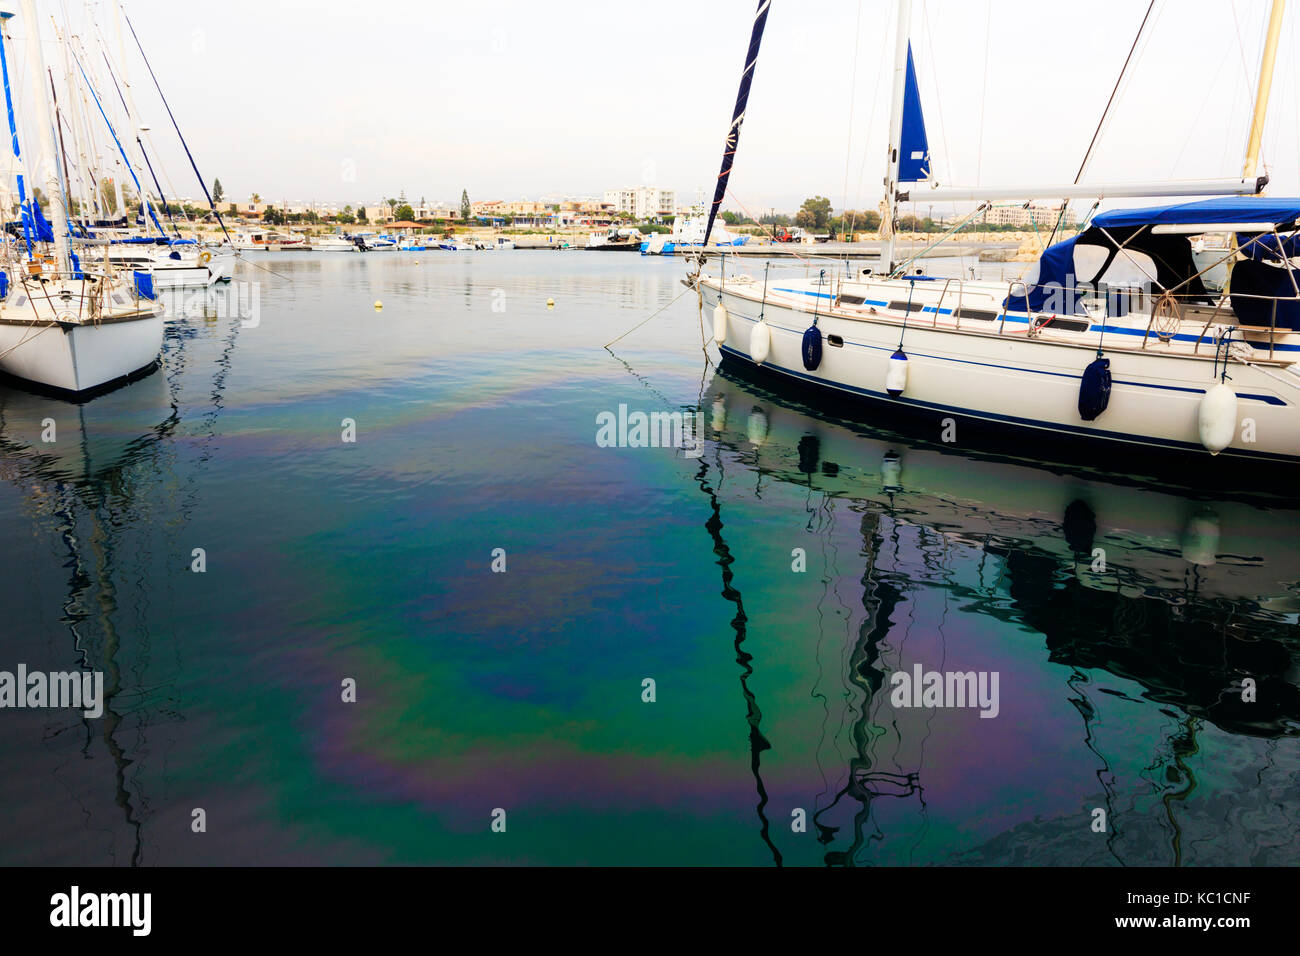 Yachts moored in Zygi harbour with fuel pollution casting a rainbow sheen on the water surface. Stock Photo